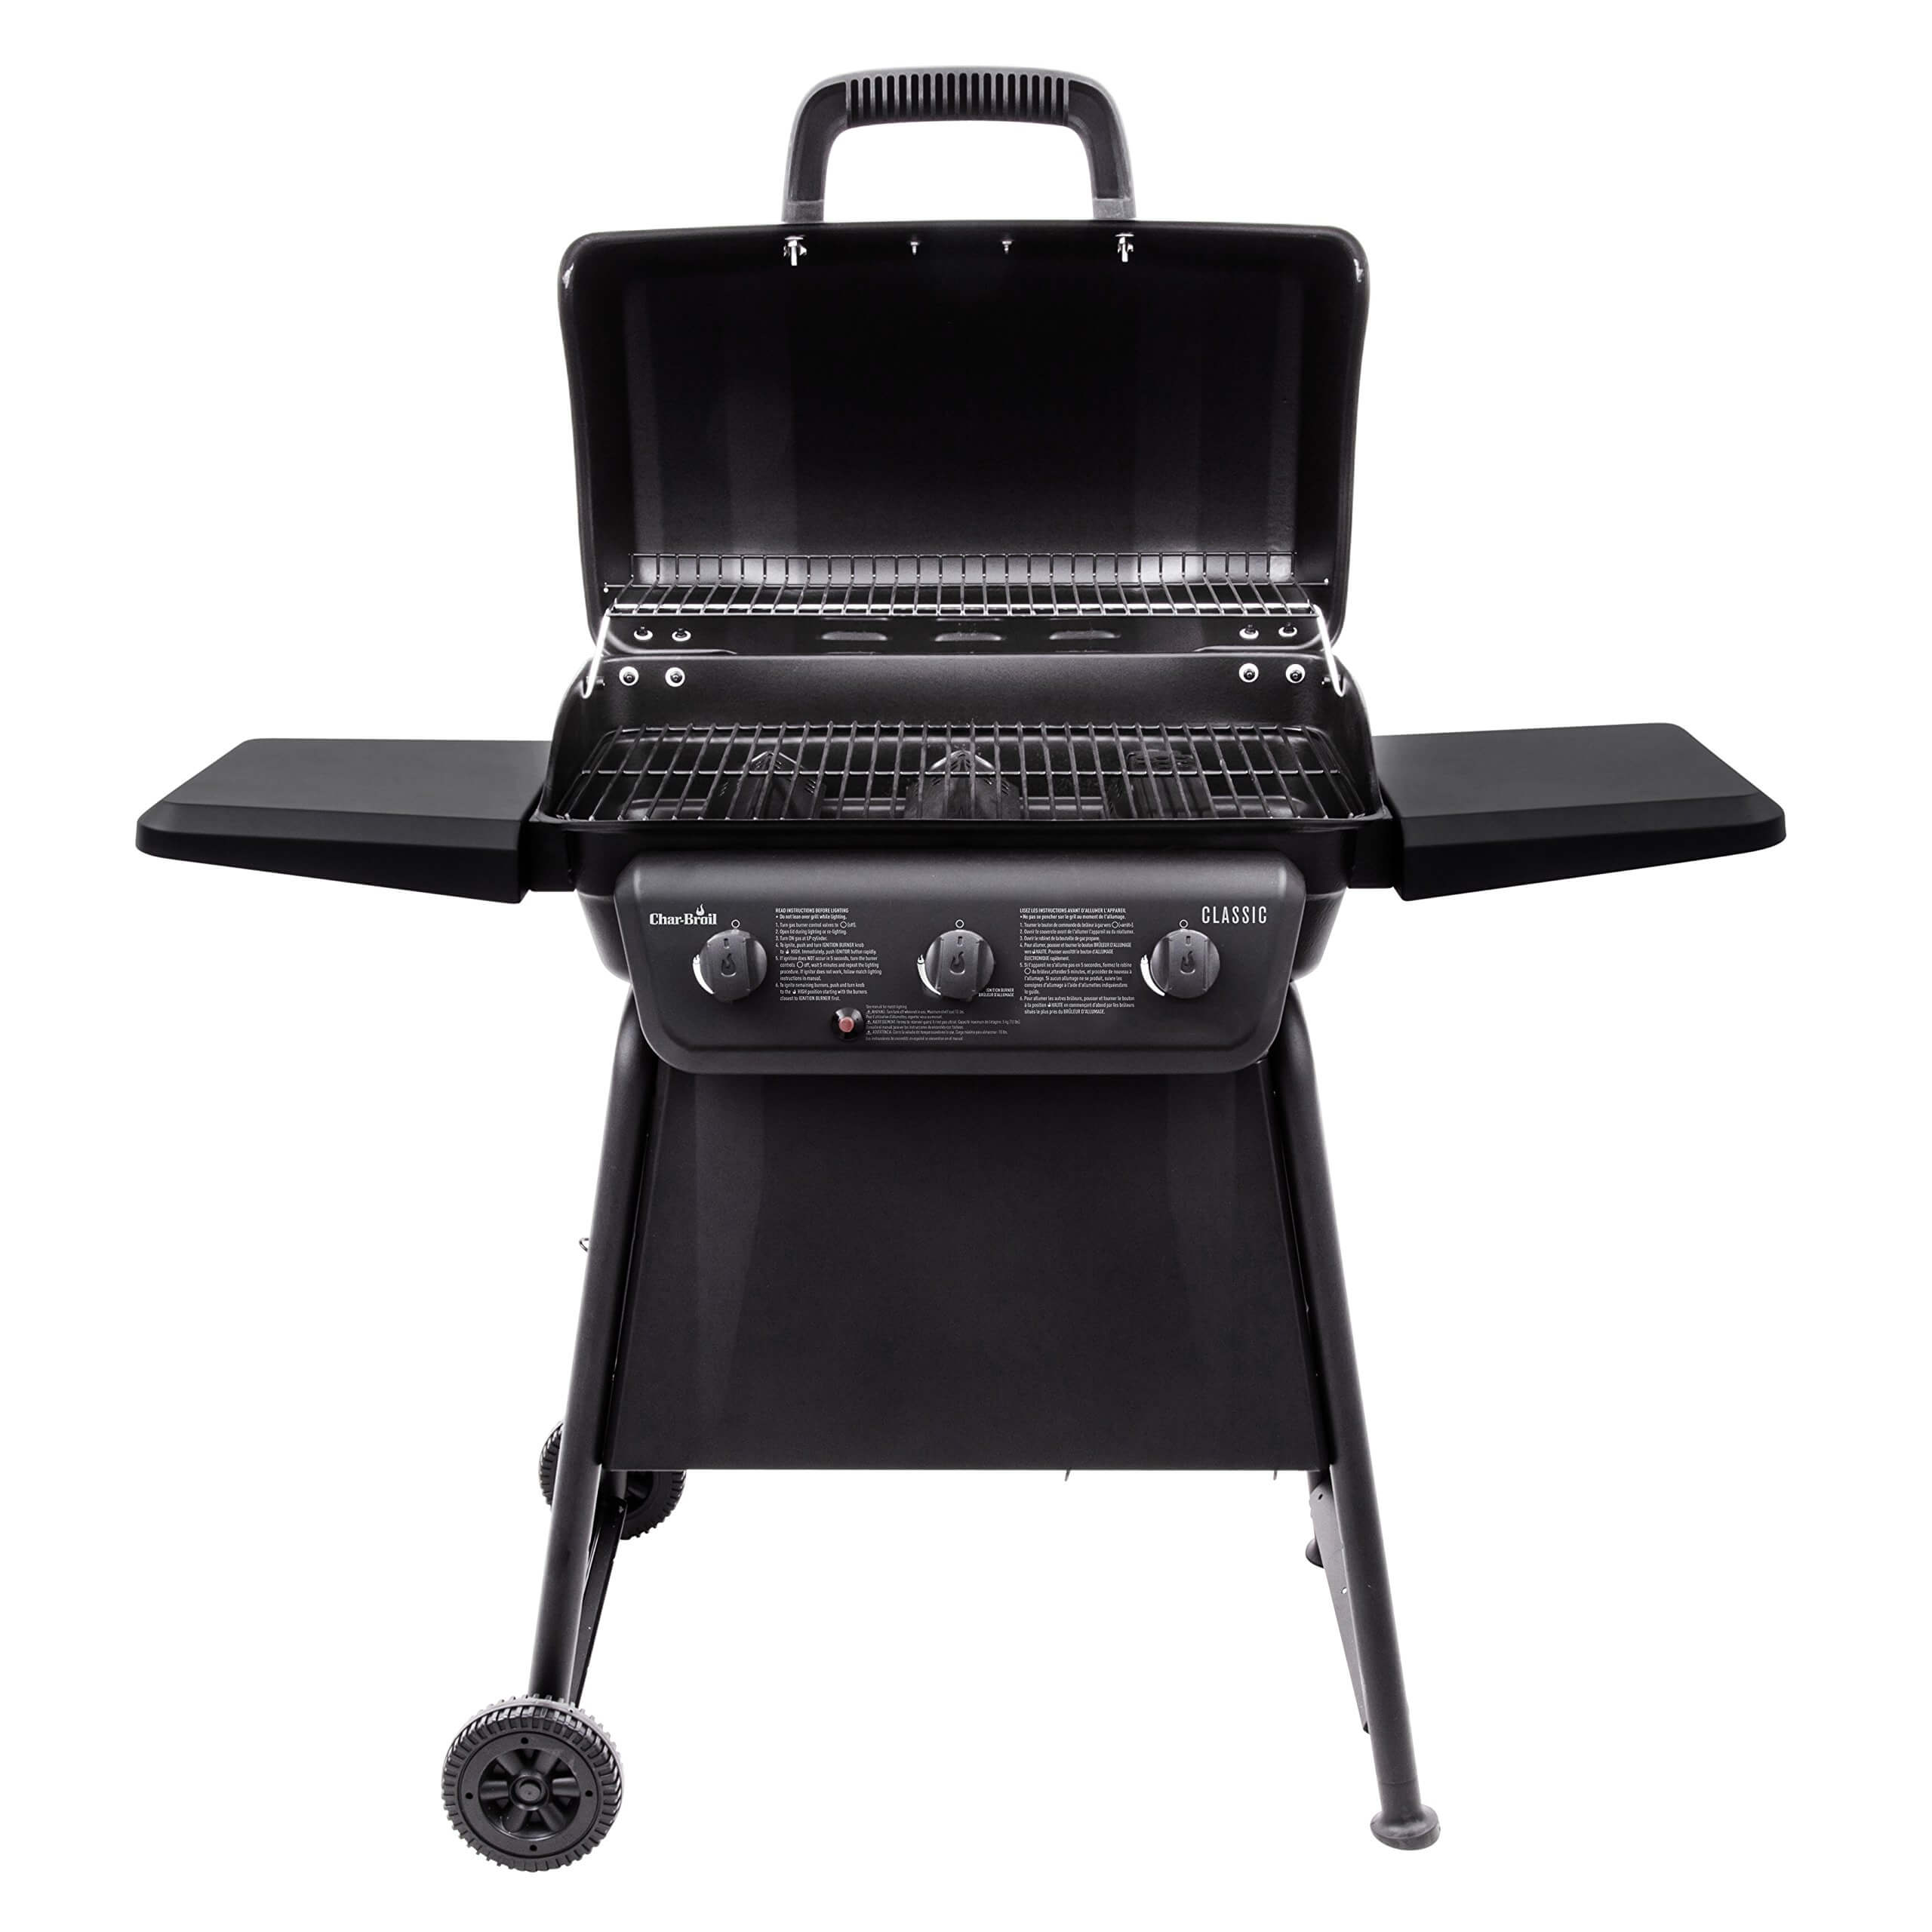 Best Gas Grill under $300 for Delicious and Easy Home Grilling, best gas grills under 300, cheap gas grills, best small gas grill, Char-Broil Classic 360 3-Burner Gas Grill, best gas grills under $200